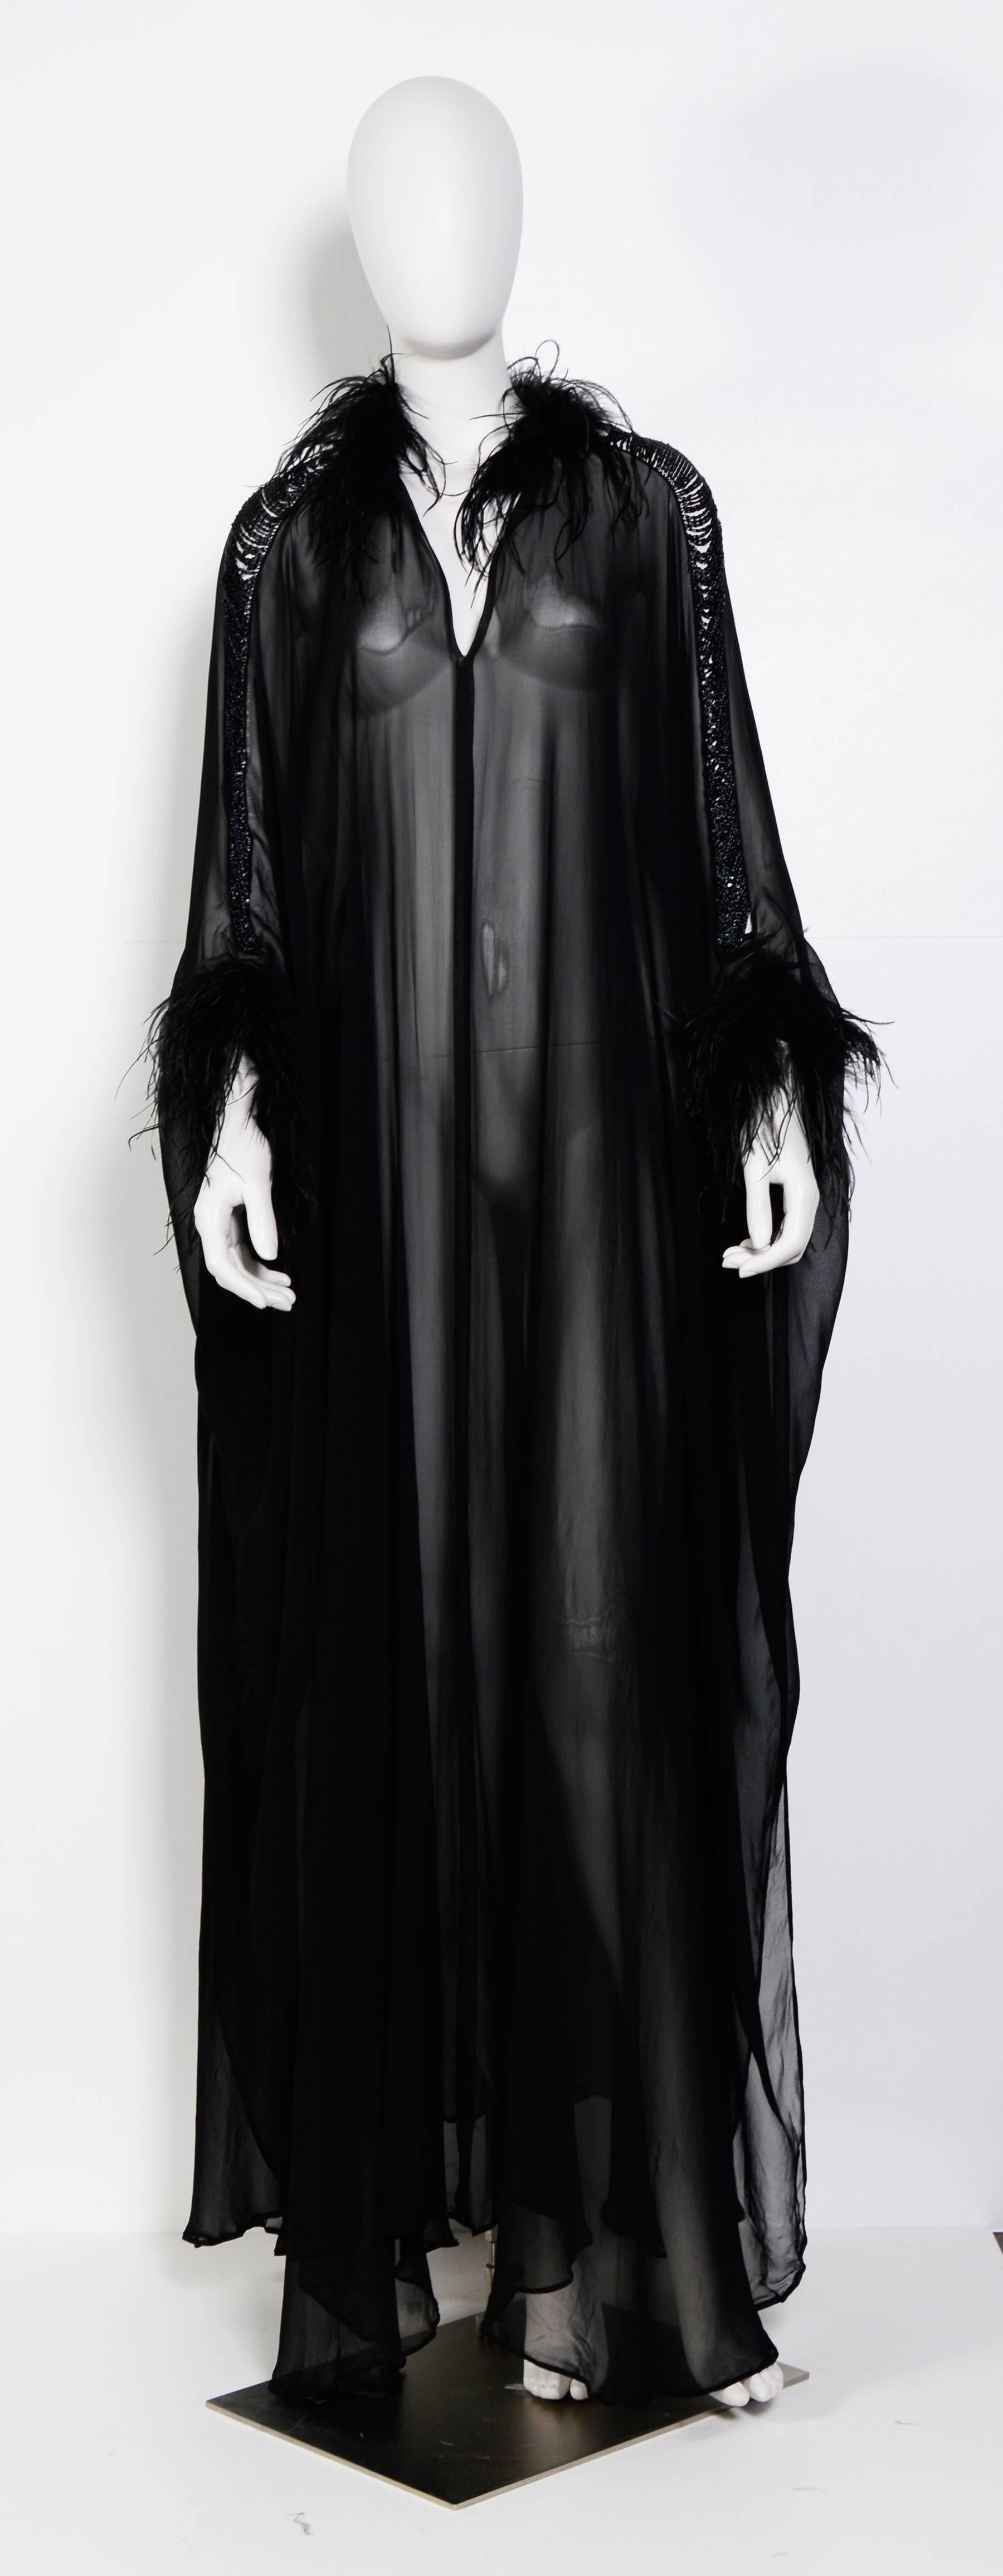 STUNNING!!! 
Rare collectors item by Loris Azzaro. 
Black silk transparent caftan dress. Sleeve with chain detail, feathers around wrist and neck. 
There is no front or back, wear it with or without cleavage.
Excellent condition
Measurements